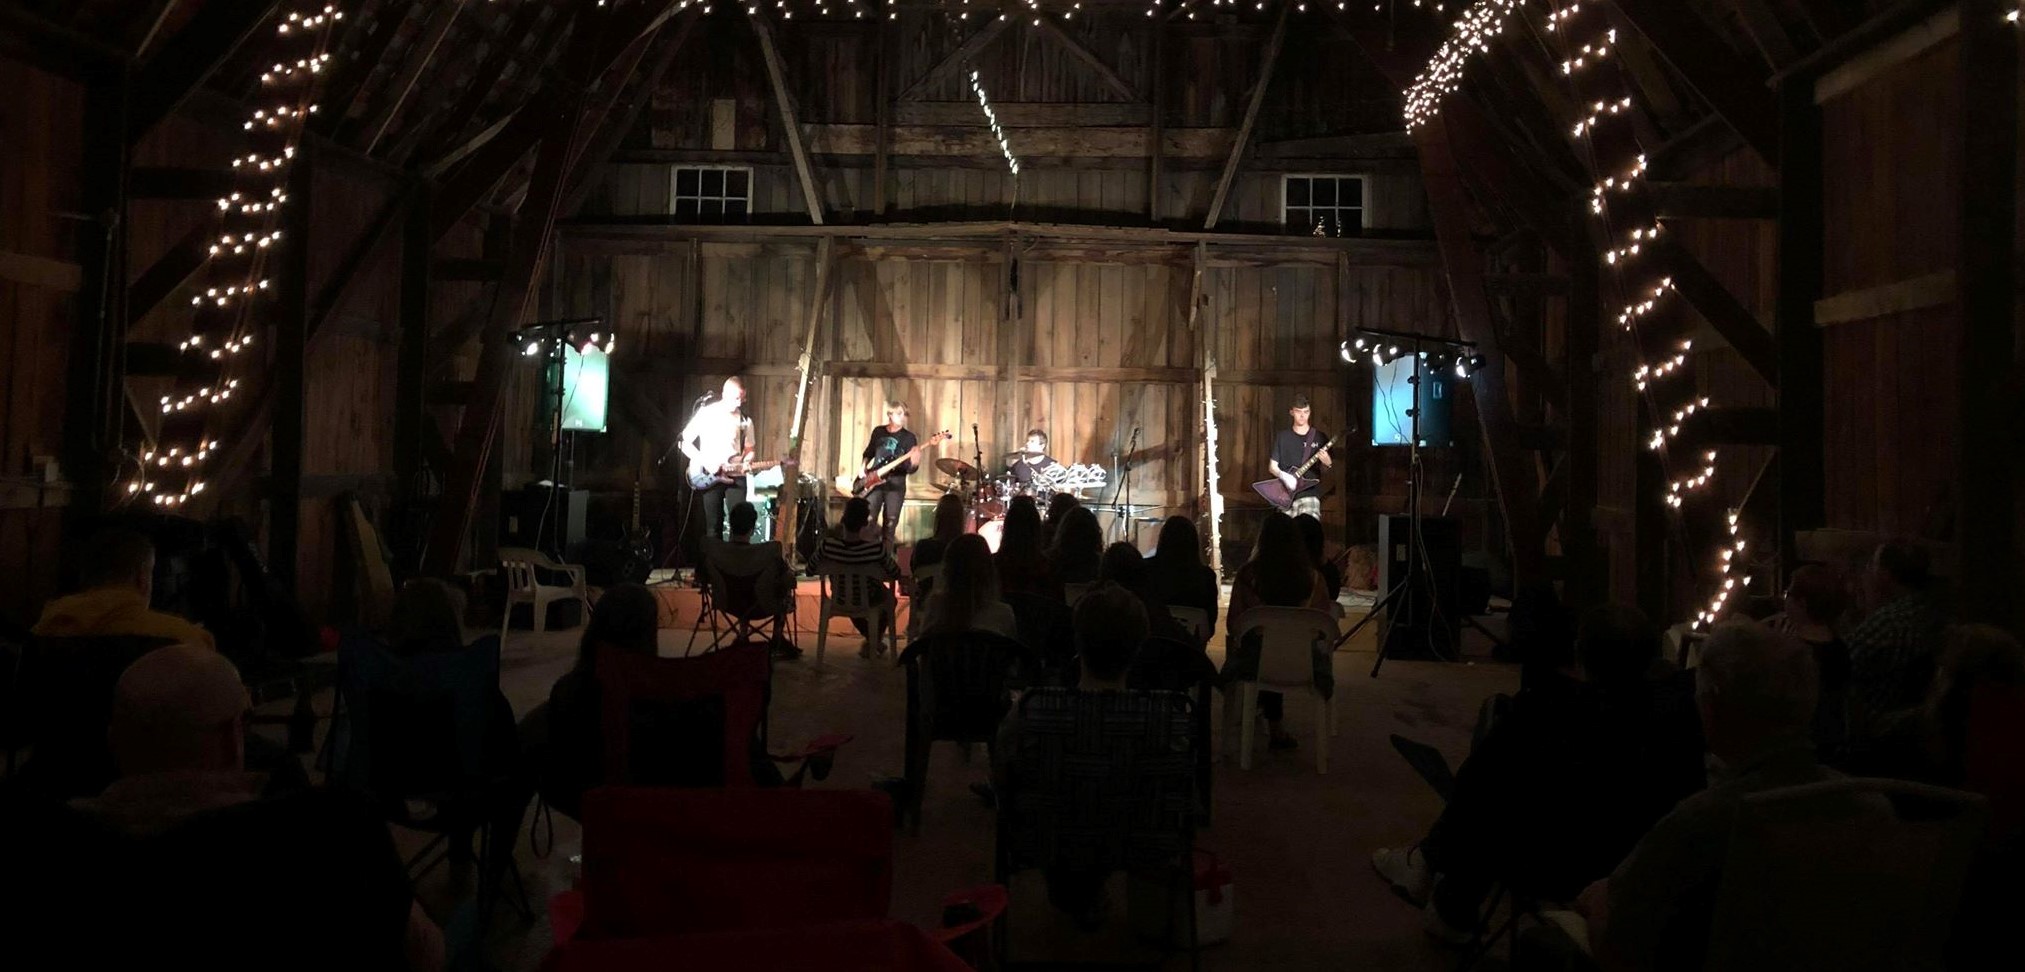 TTKH performing in a barn